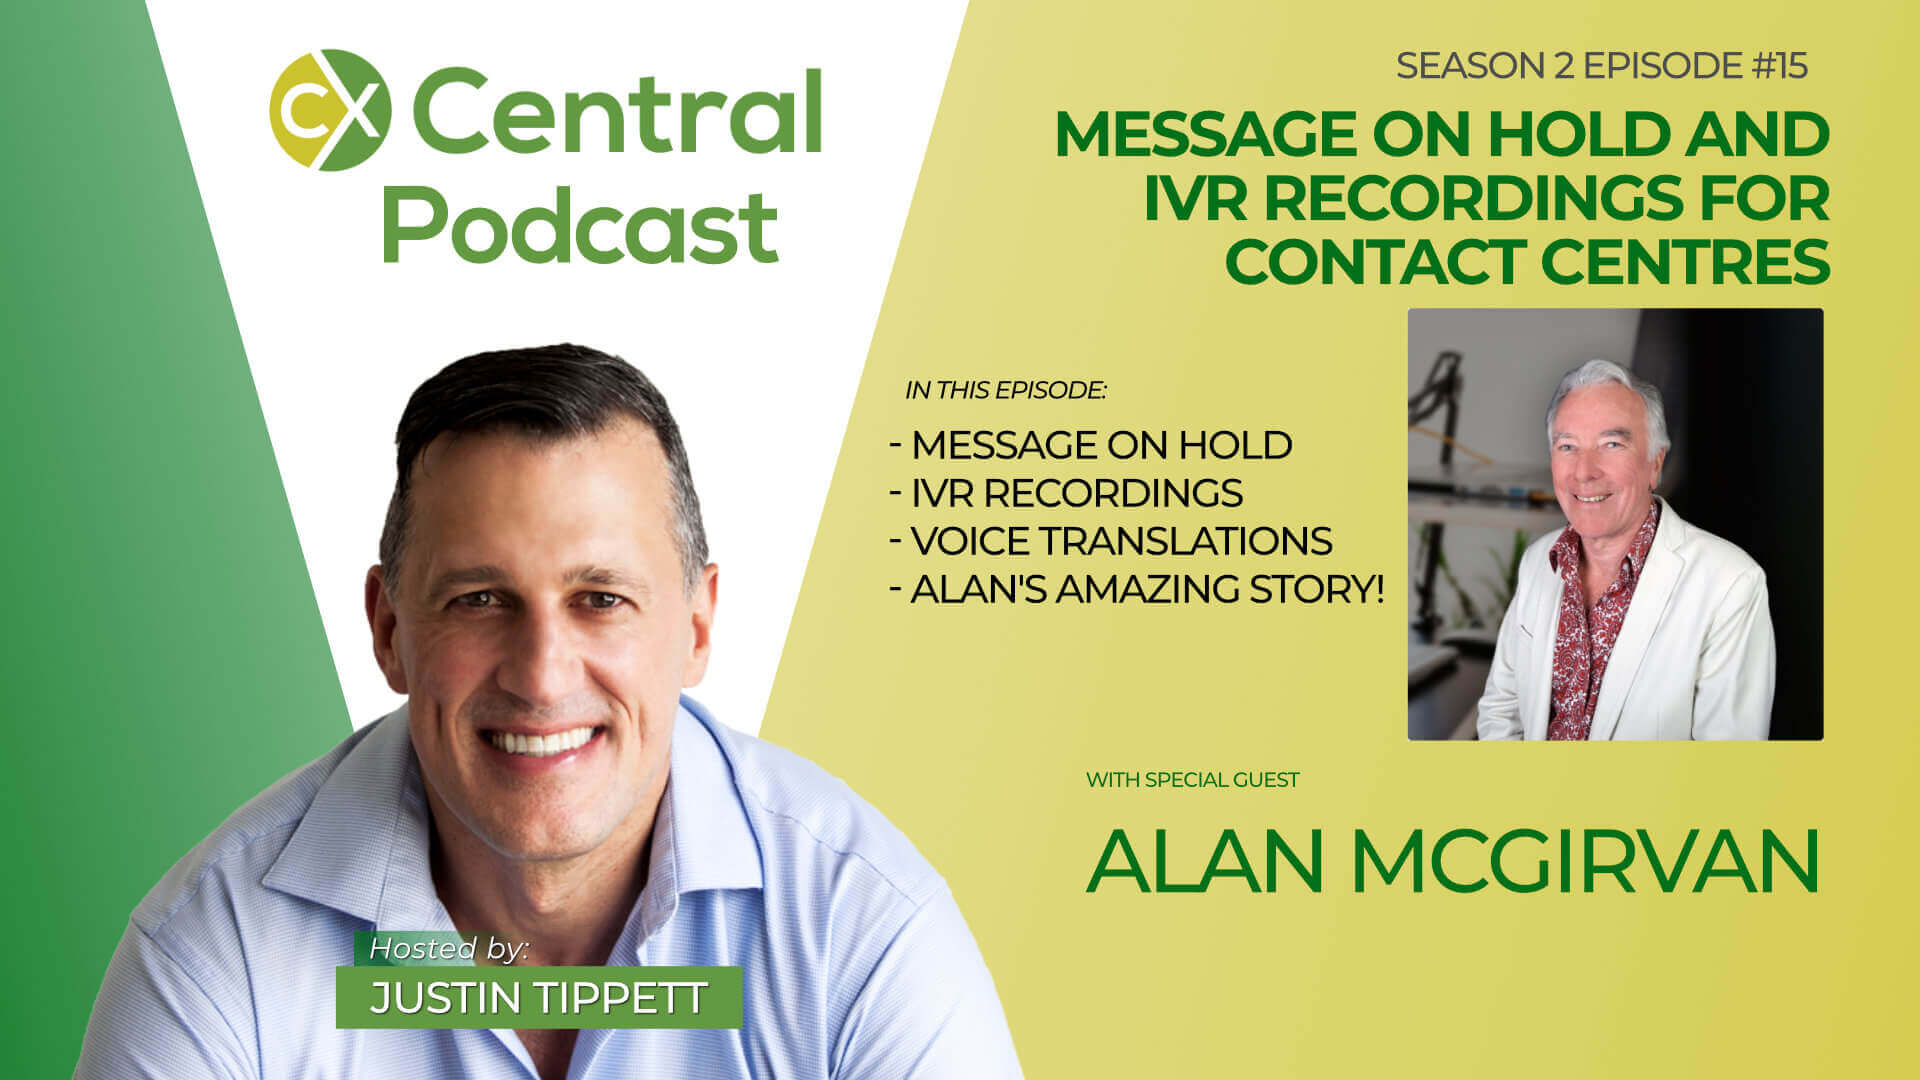 image of Justin Tippett and Alan McGirvan with the title Message on Hold and IVR Recordings for Contact Centres